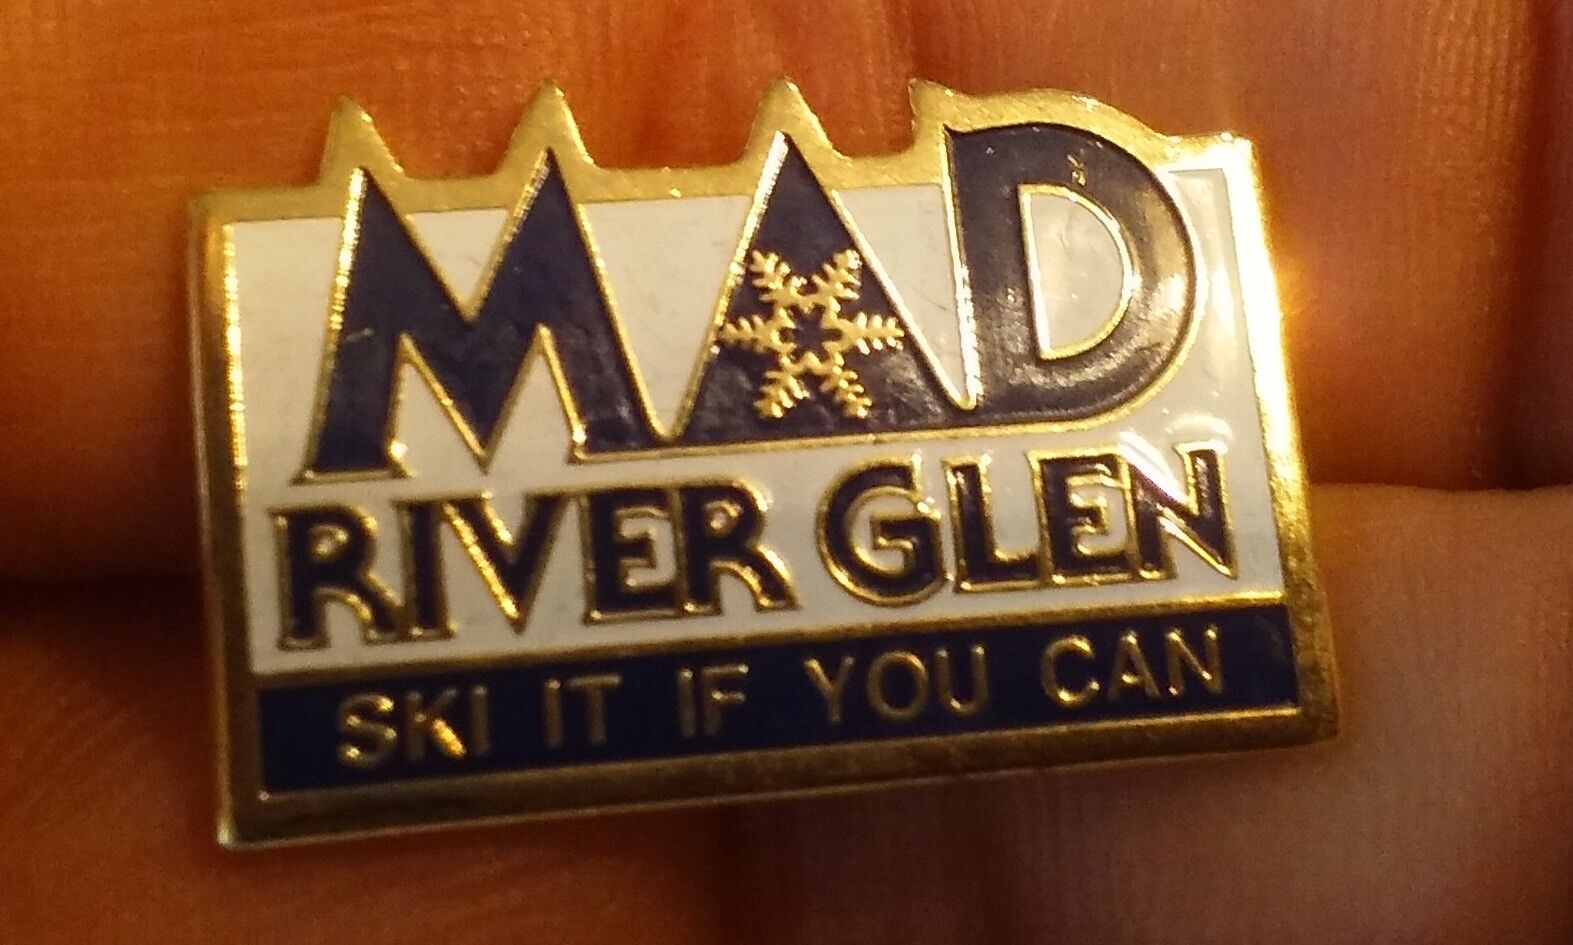 MAD River Glen pin badge Ski It If You Can